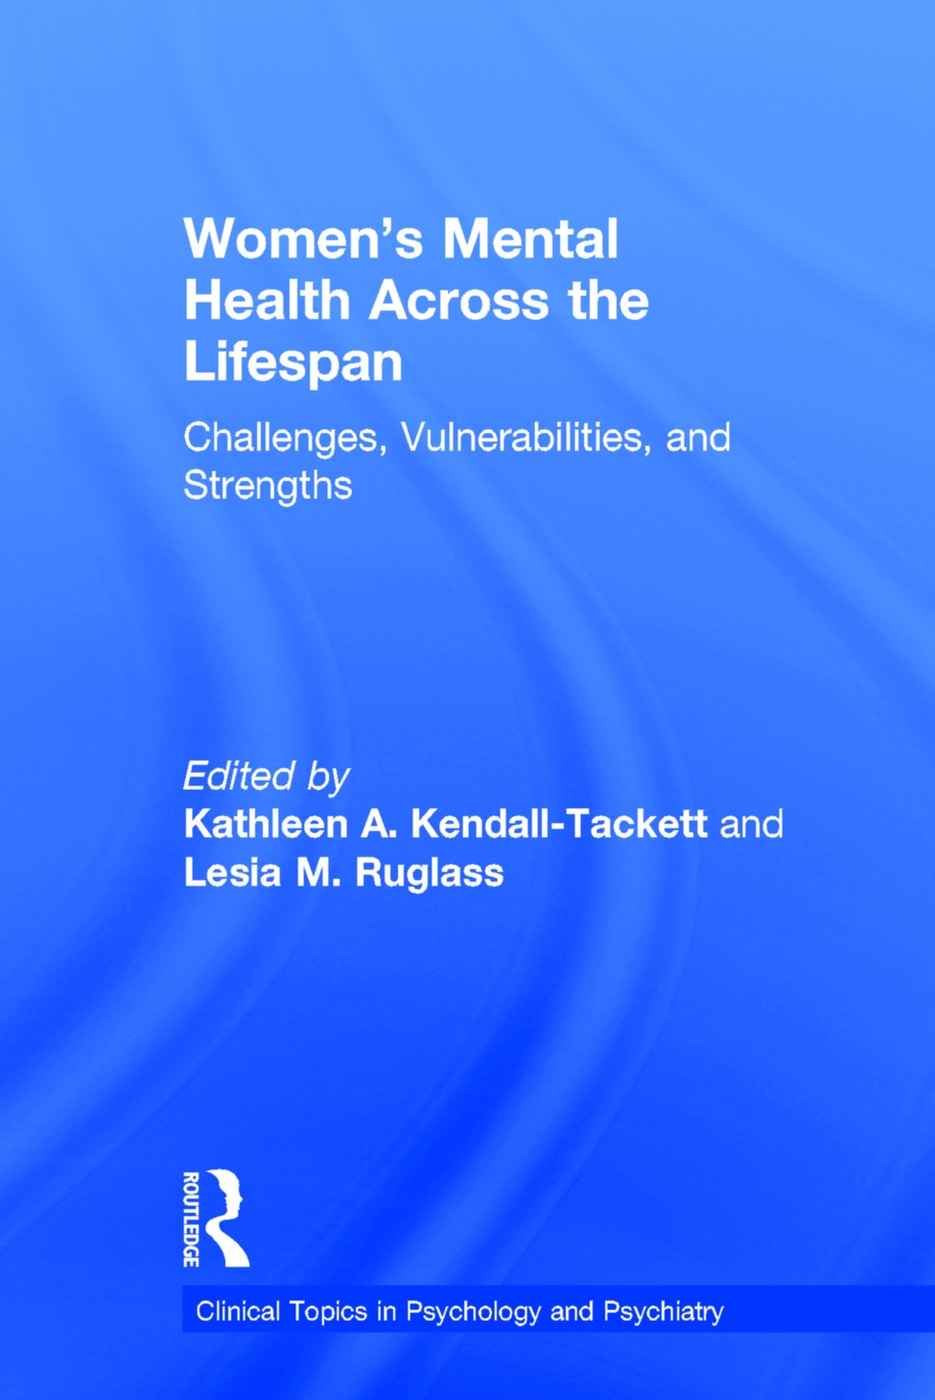 Women’s Mental Health Across the Lifespan: Challenges, Vulnerabilities, and Strengths